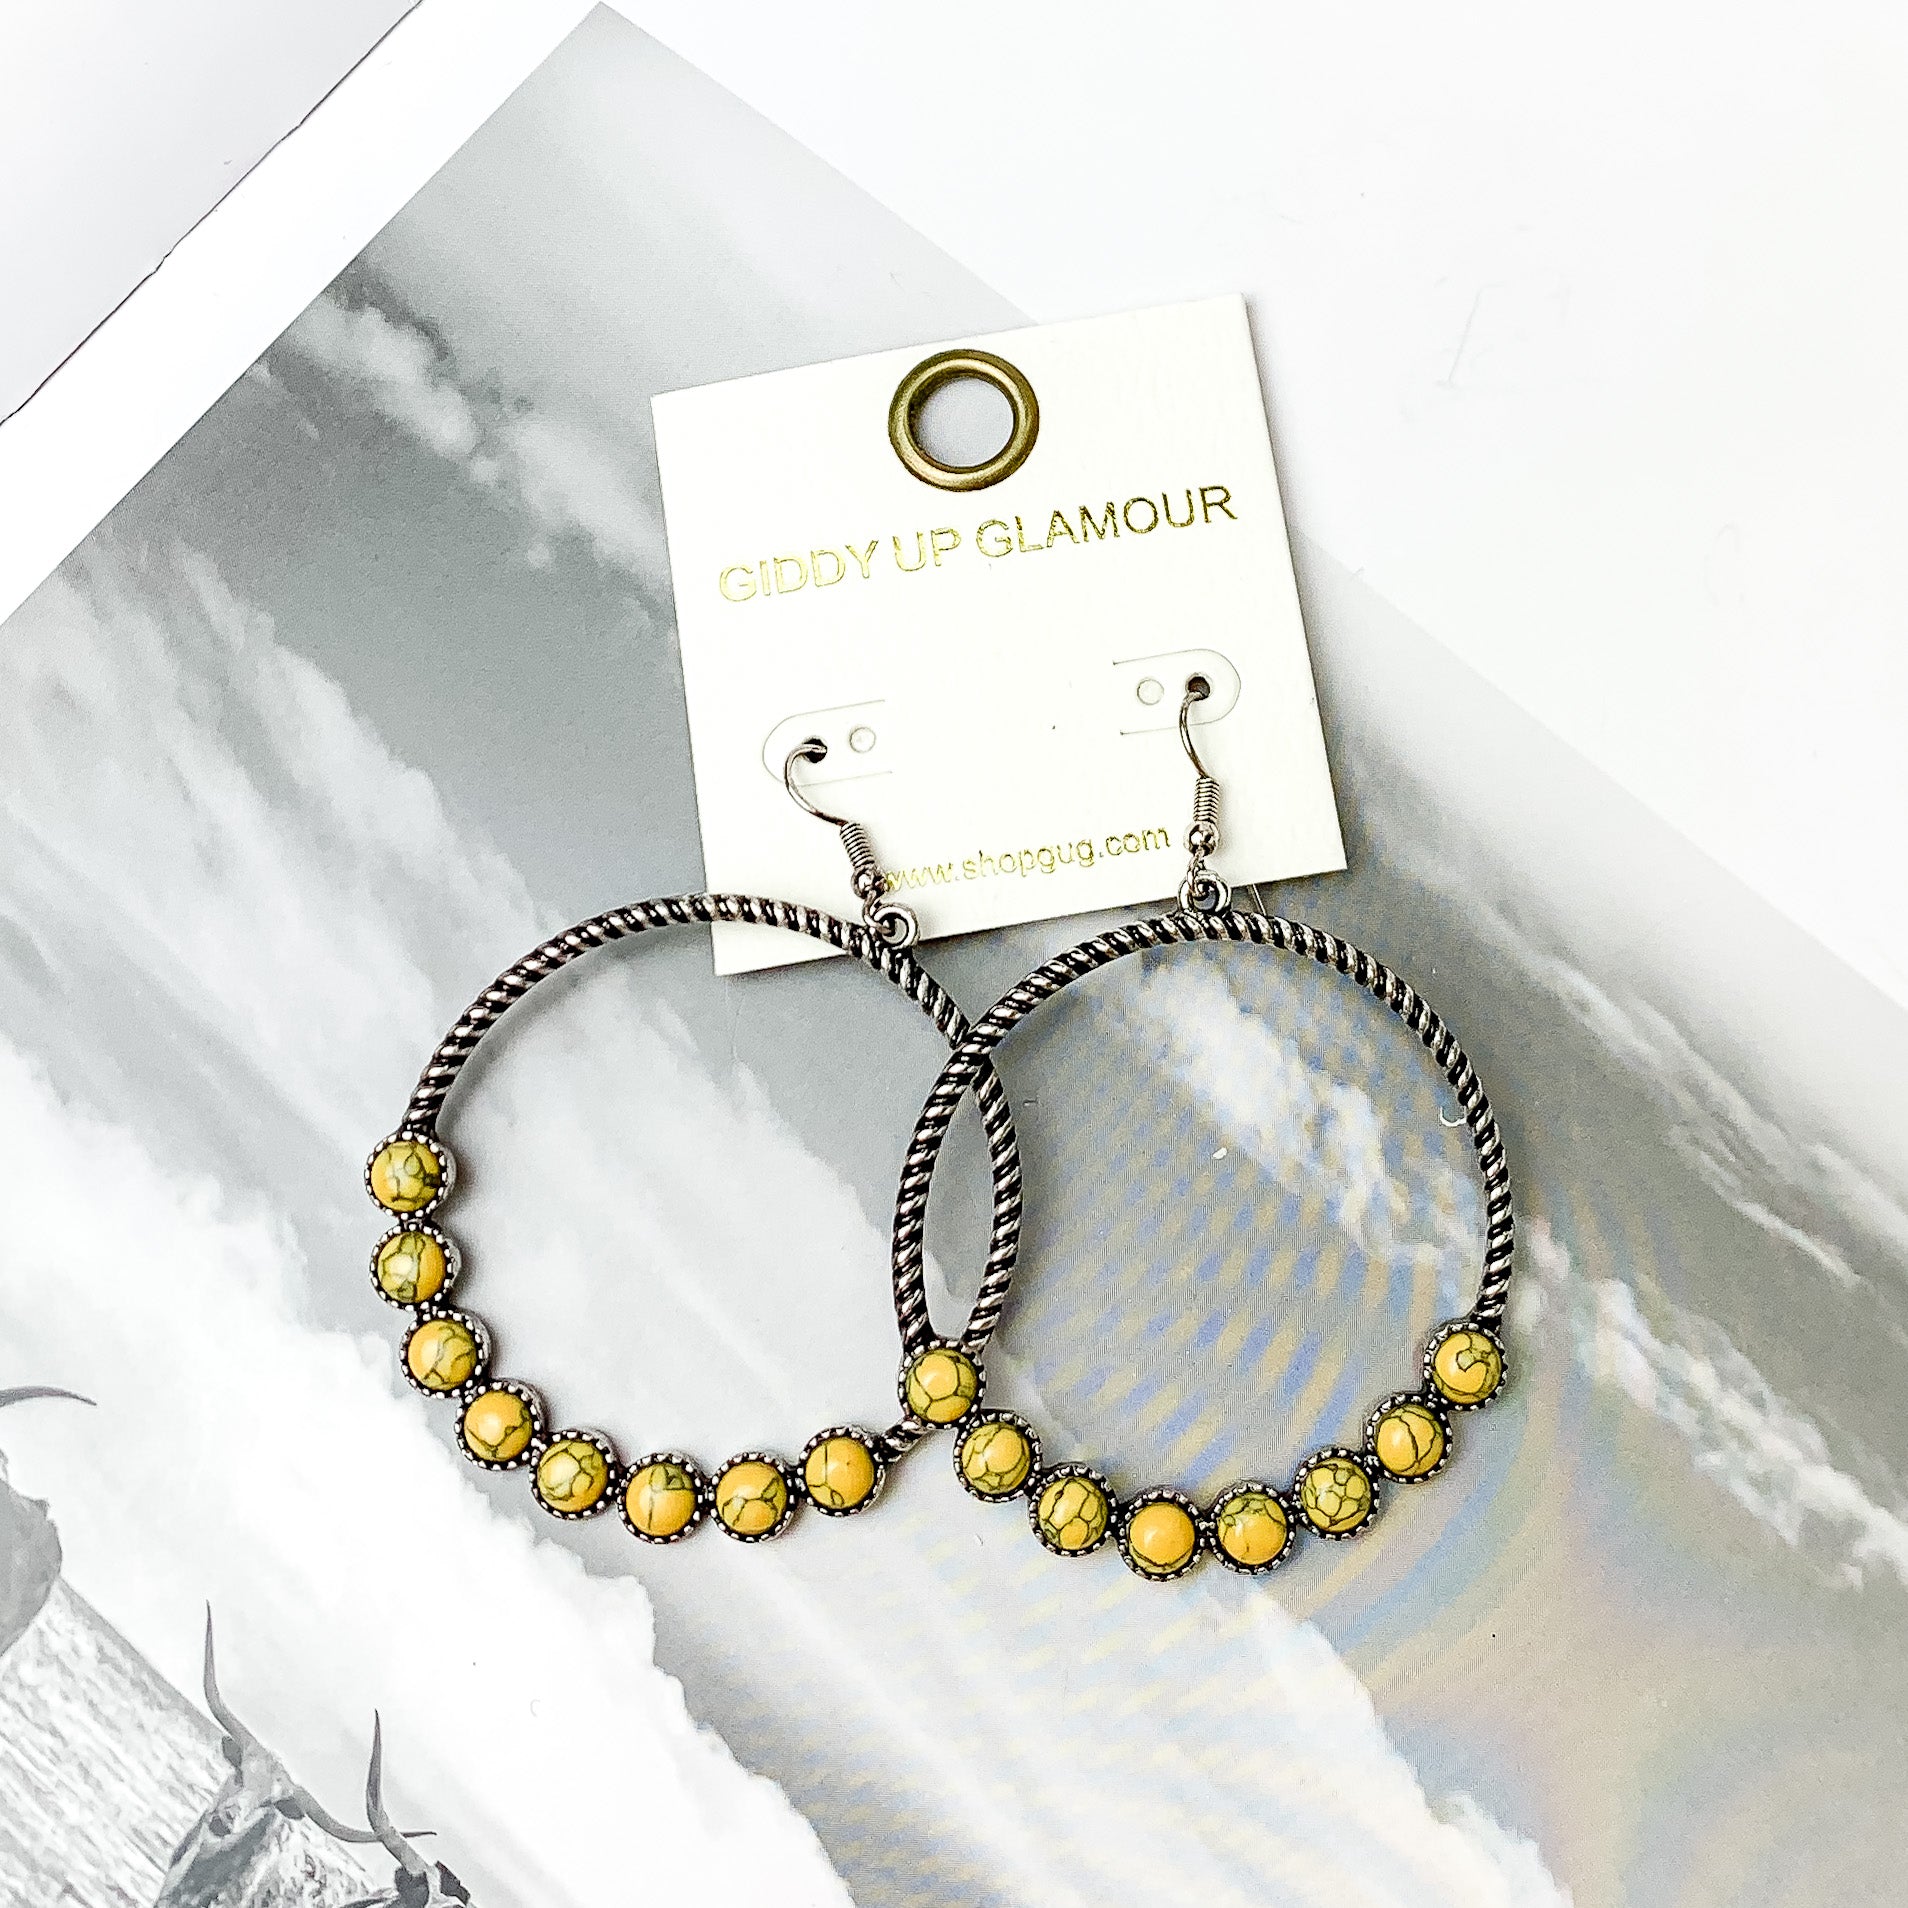 Forever Twisted Hoop Earrings with Stones in Yellow. Pictured on an open book with a gray sky in the background.